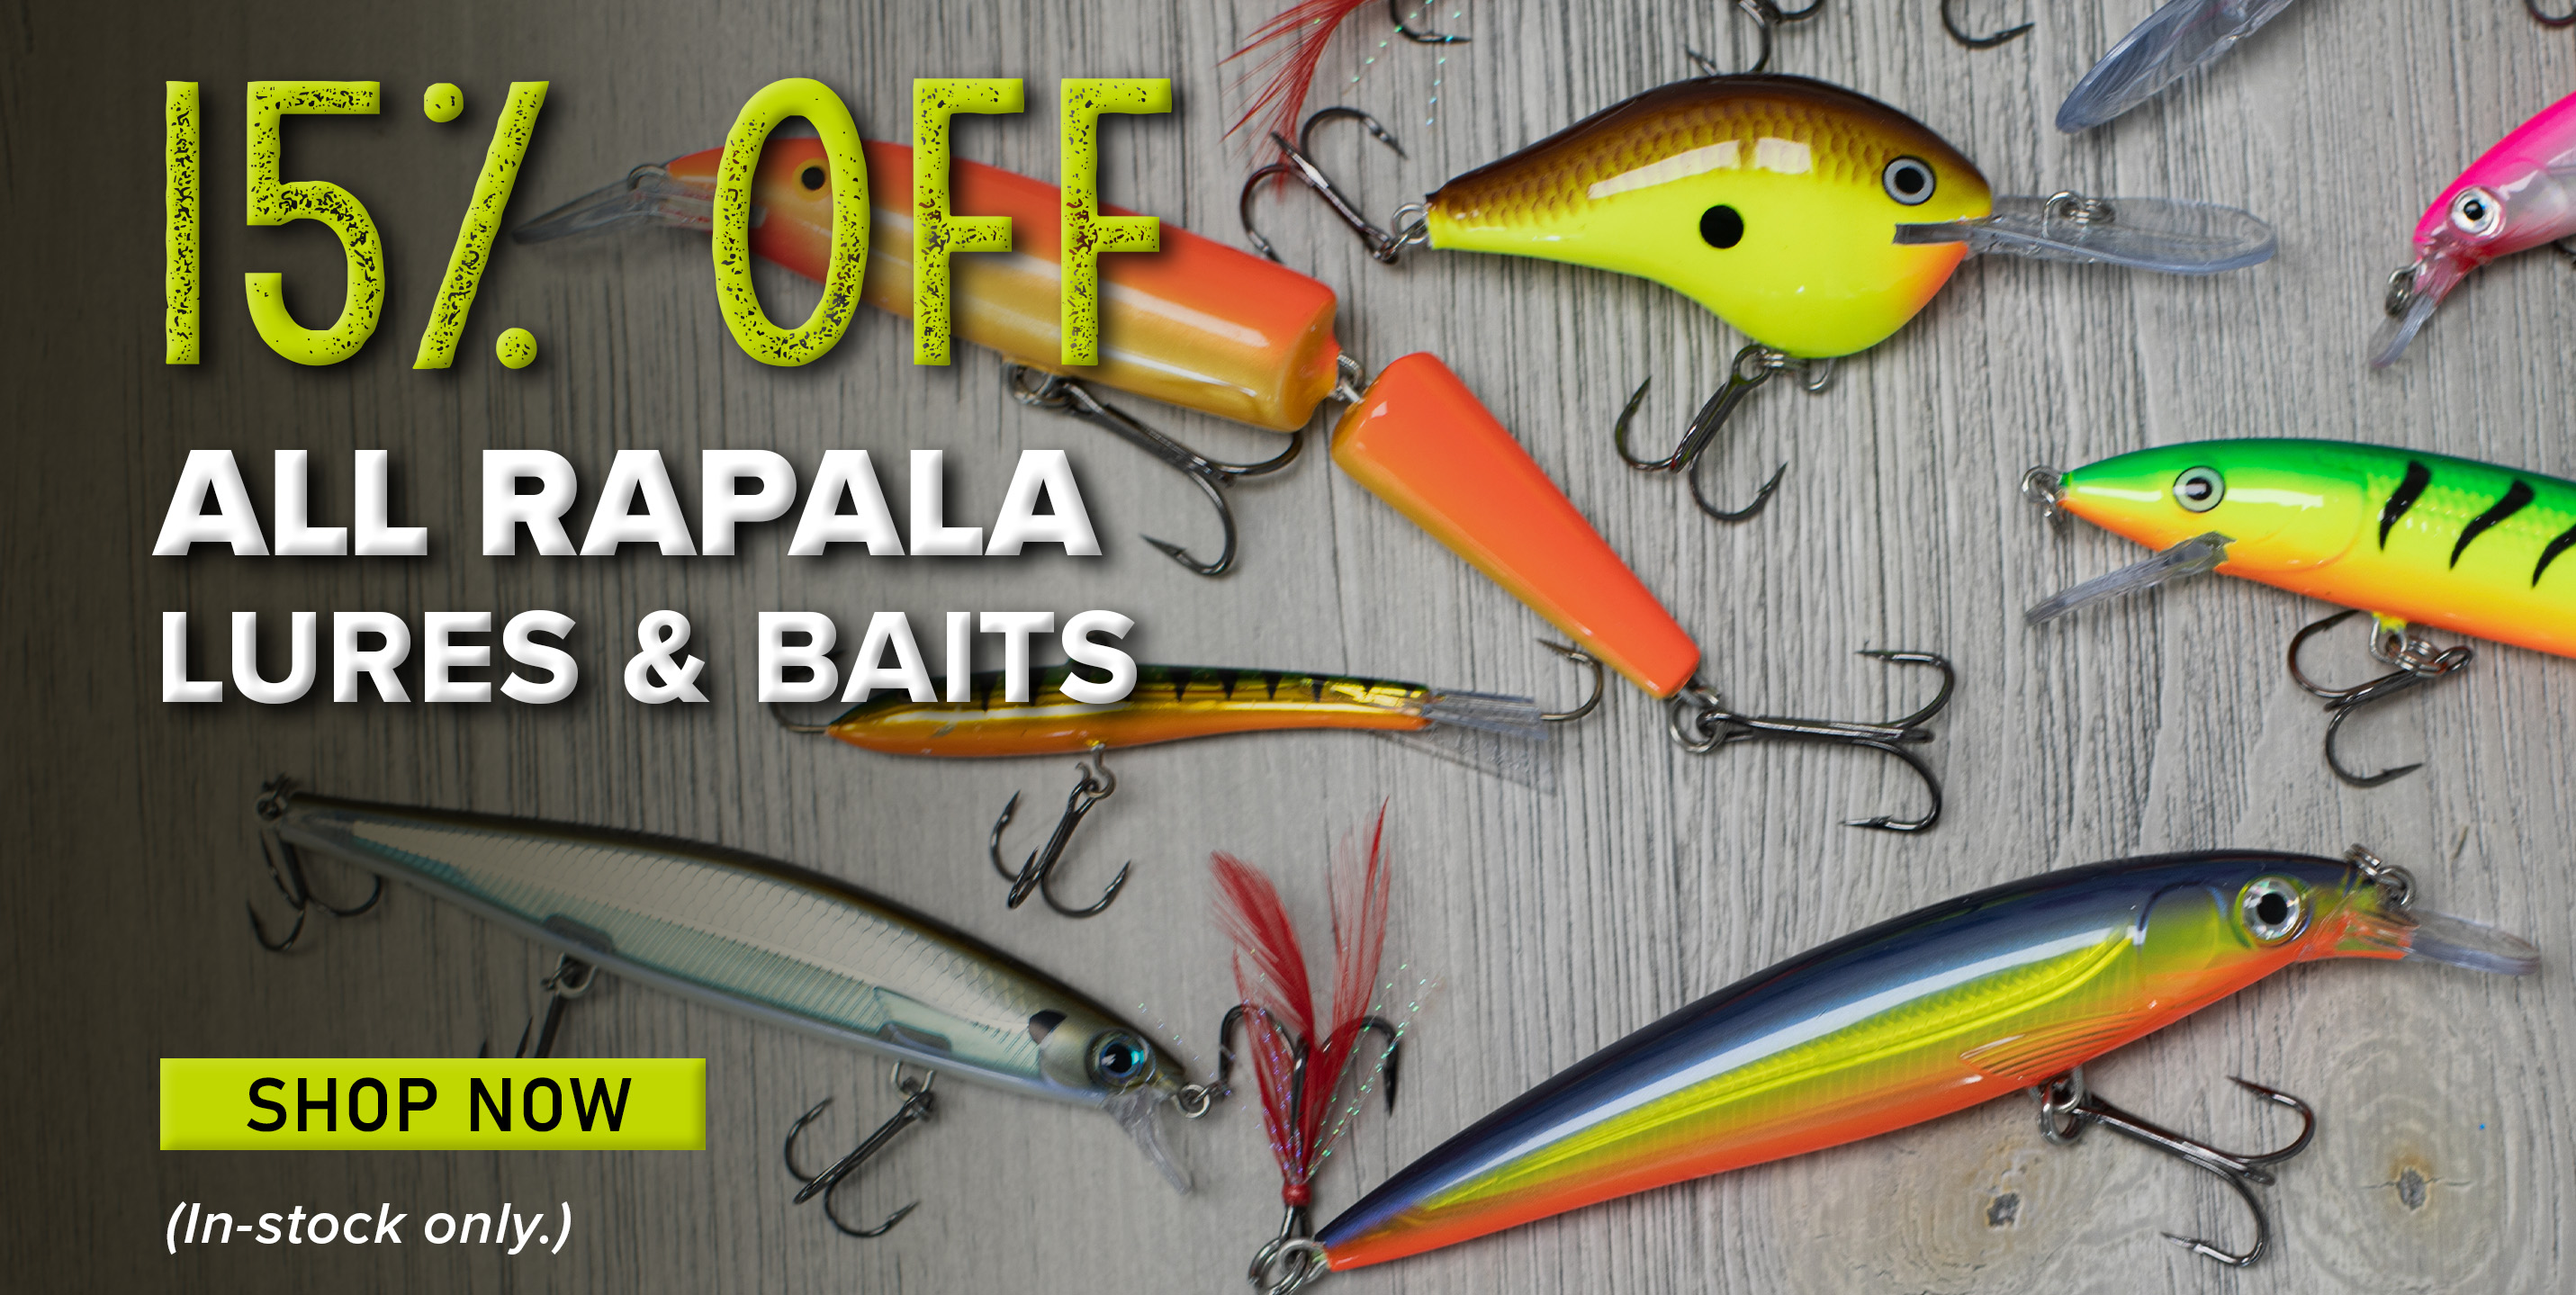 15% Off All Rapala Lures & Baits Shop Now (In-stock only.)